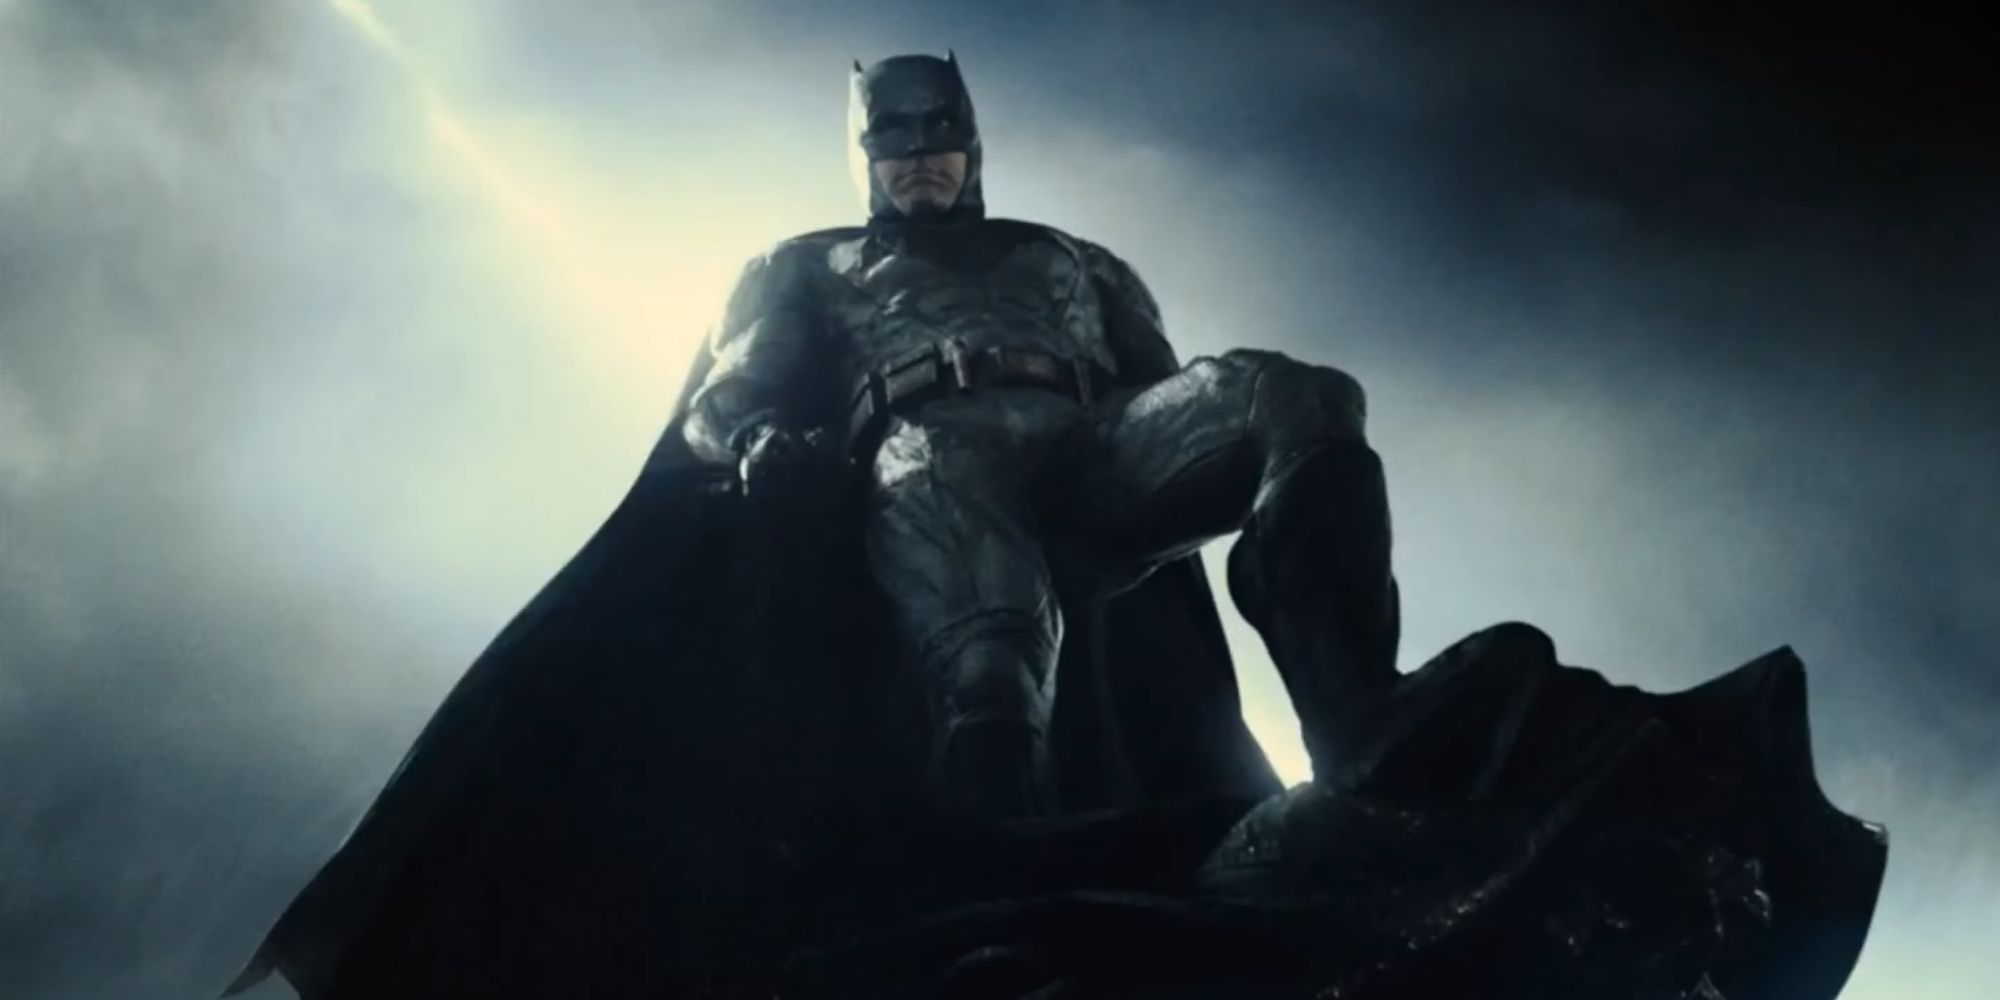 Batman standing on a gargoyle with lightning flashing behind him in Zack Snyder's Justice League